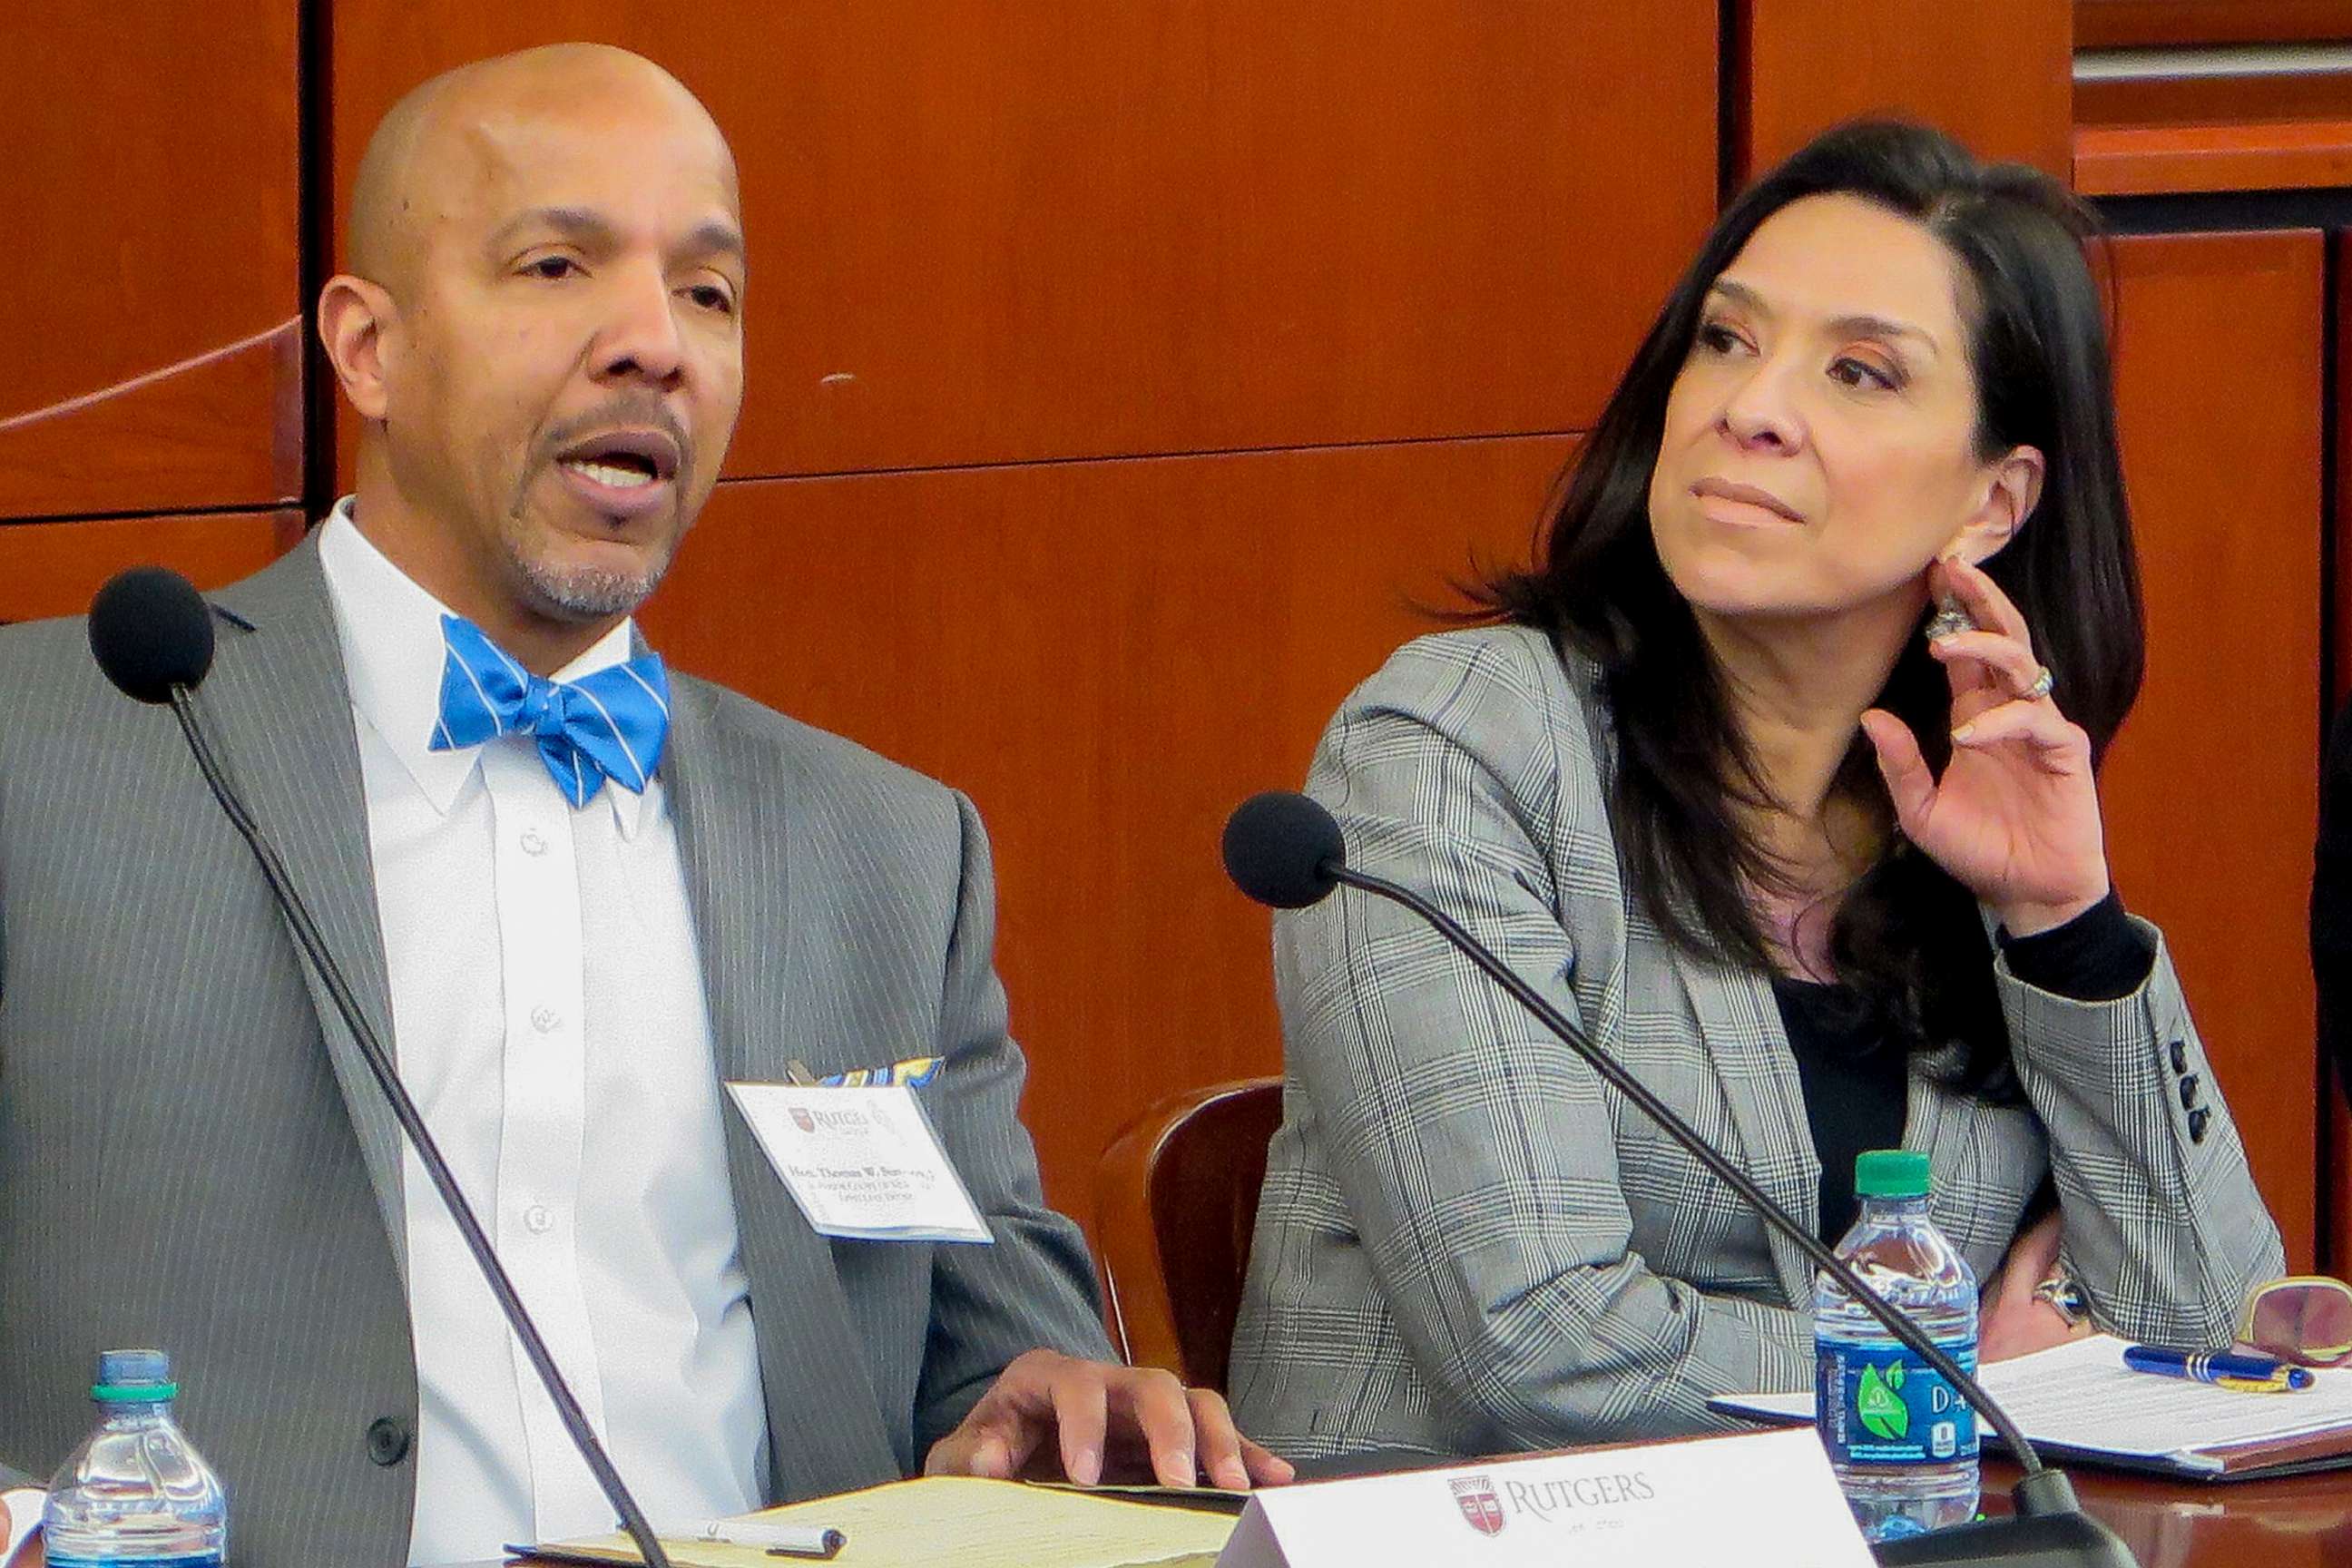 PHOTO: This undated photo provided by the Rutgers Law School shows U.S. District Judge Esther Salas, right, during a conference at the Rutgers Law School in Newark, N.J. with appellate Judge Thomas Sumners.